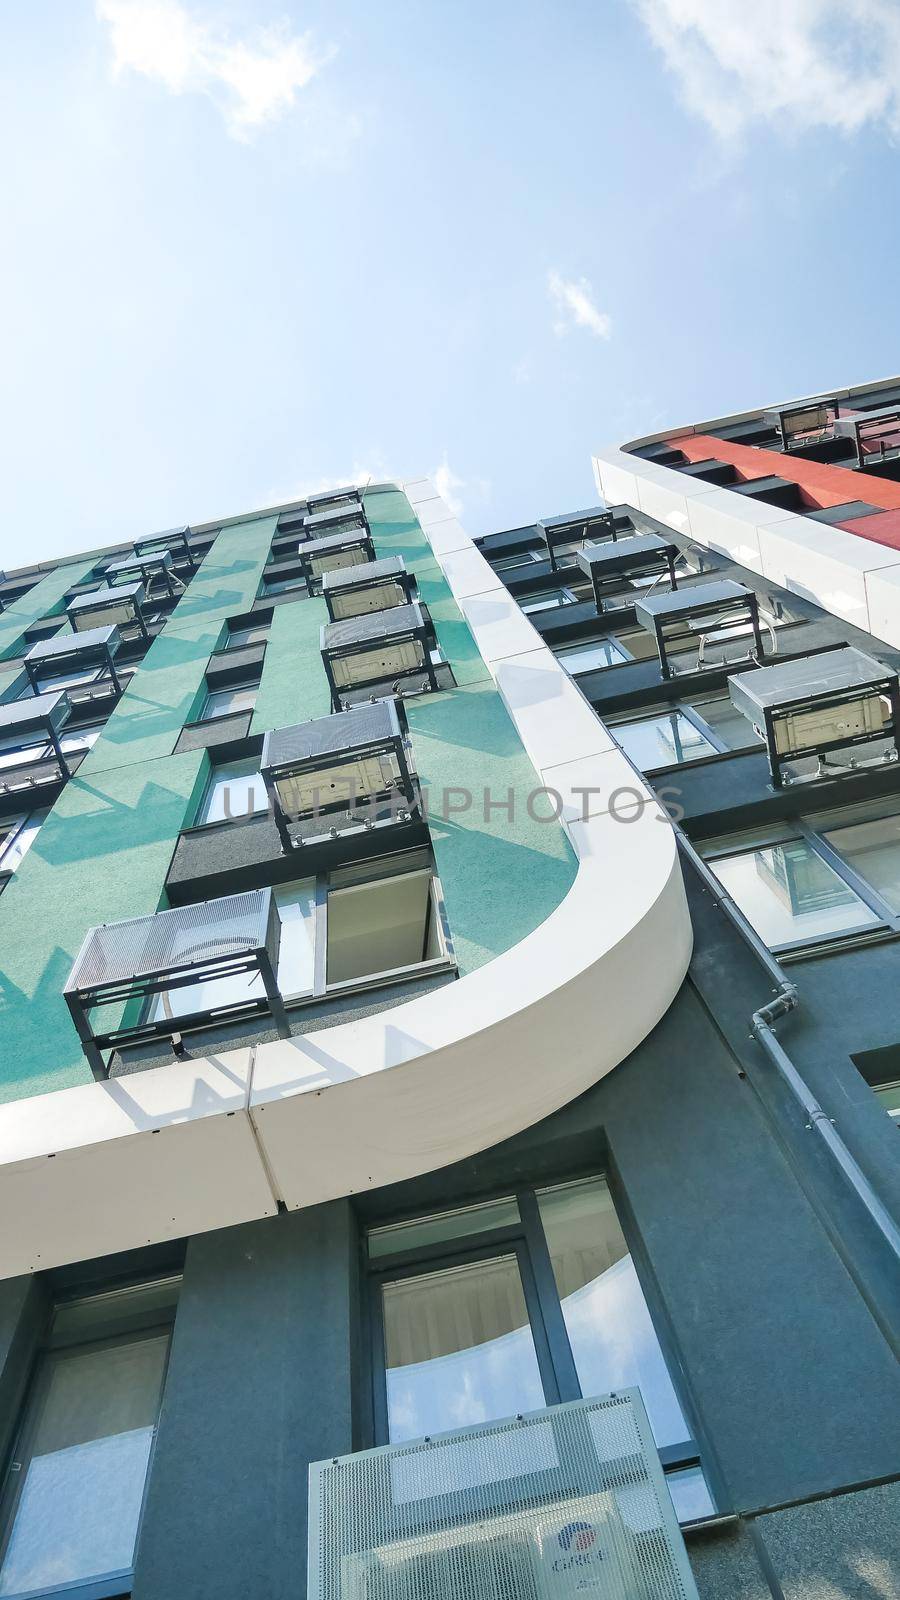 Fragment of new residential complex with buildings exterior, luxury house and home complex on blue sky background. Modern neighborhood concept.